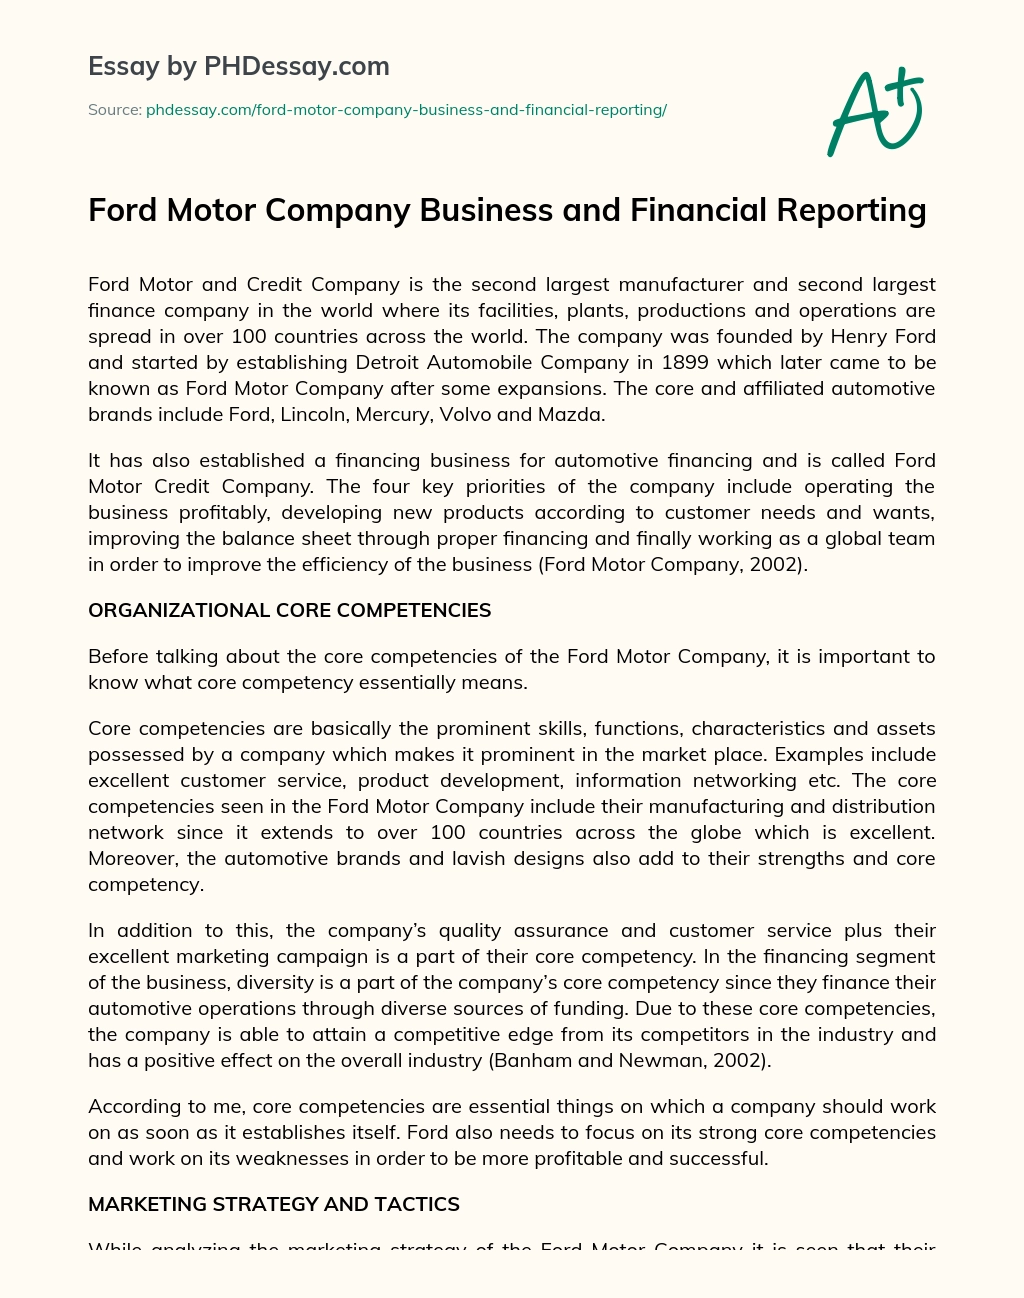 Ford Motor Company Business and Financial Reporting essay